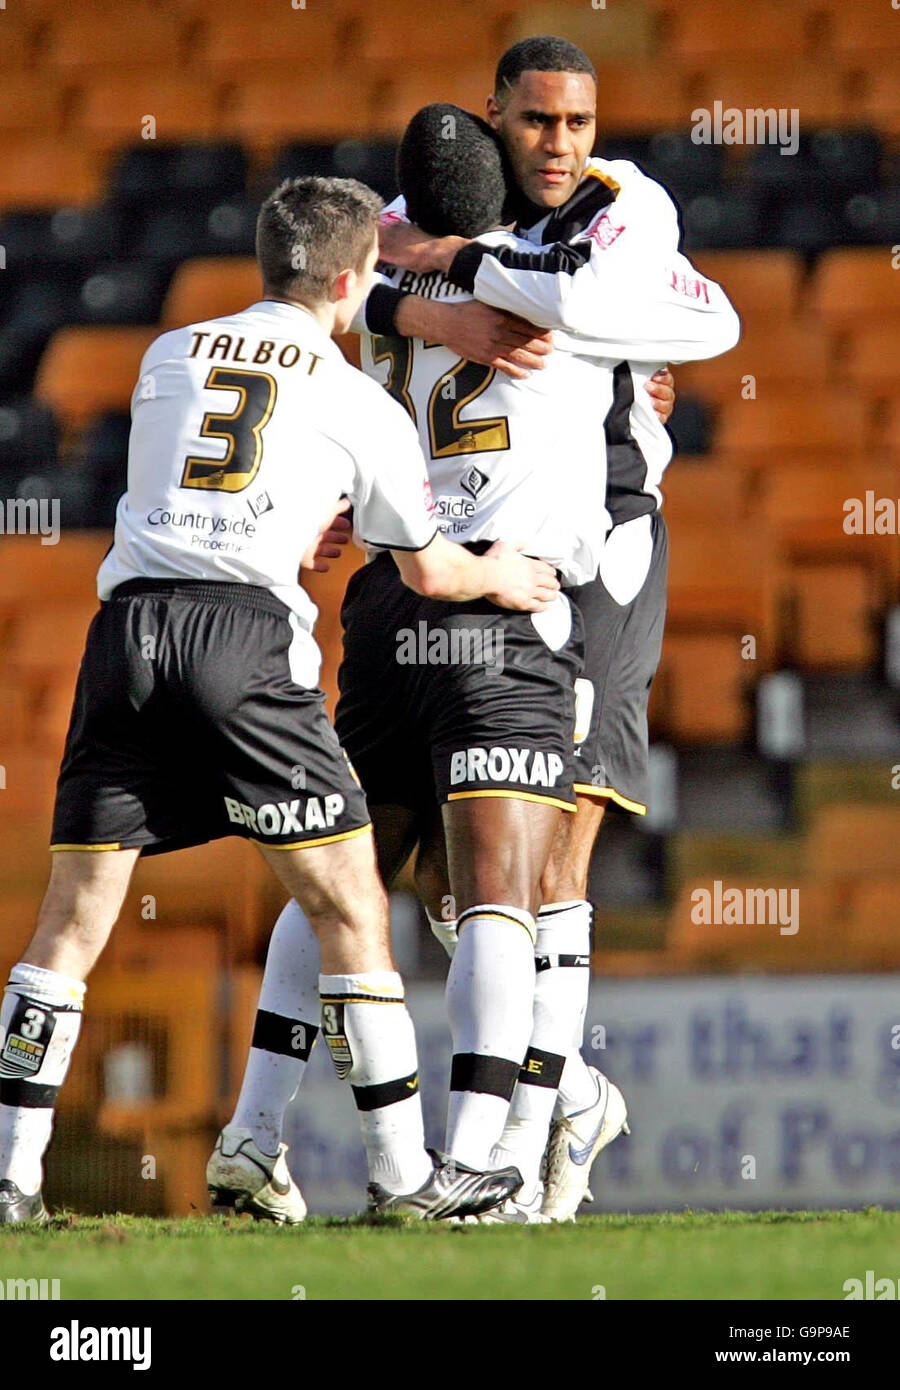 Port Vale's Leon Constantine (right) celebrates scoring the first goal with team-mates Jason Talbot (left) and Malvin Kamara during the Coca-Cola Football League One match at Vale Park, Stoke-on-Trent. Stock Photo